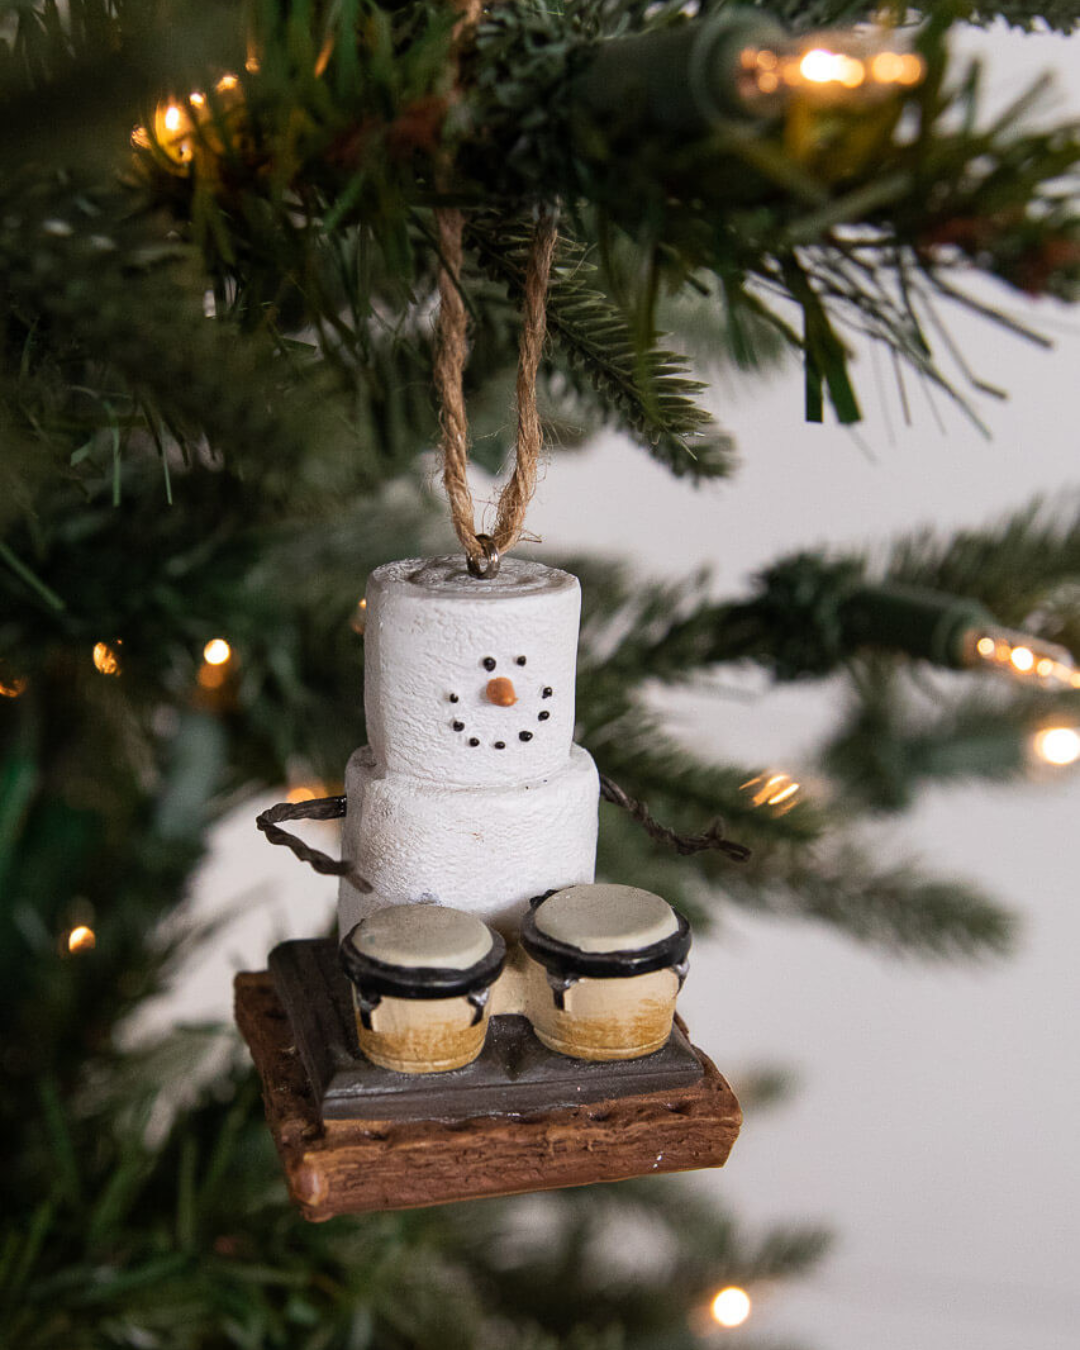 a snowperson and drums ornament from a tree